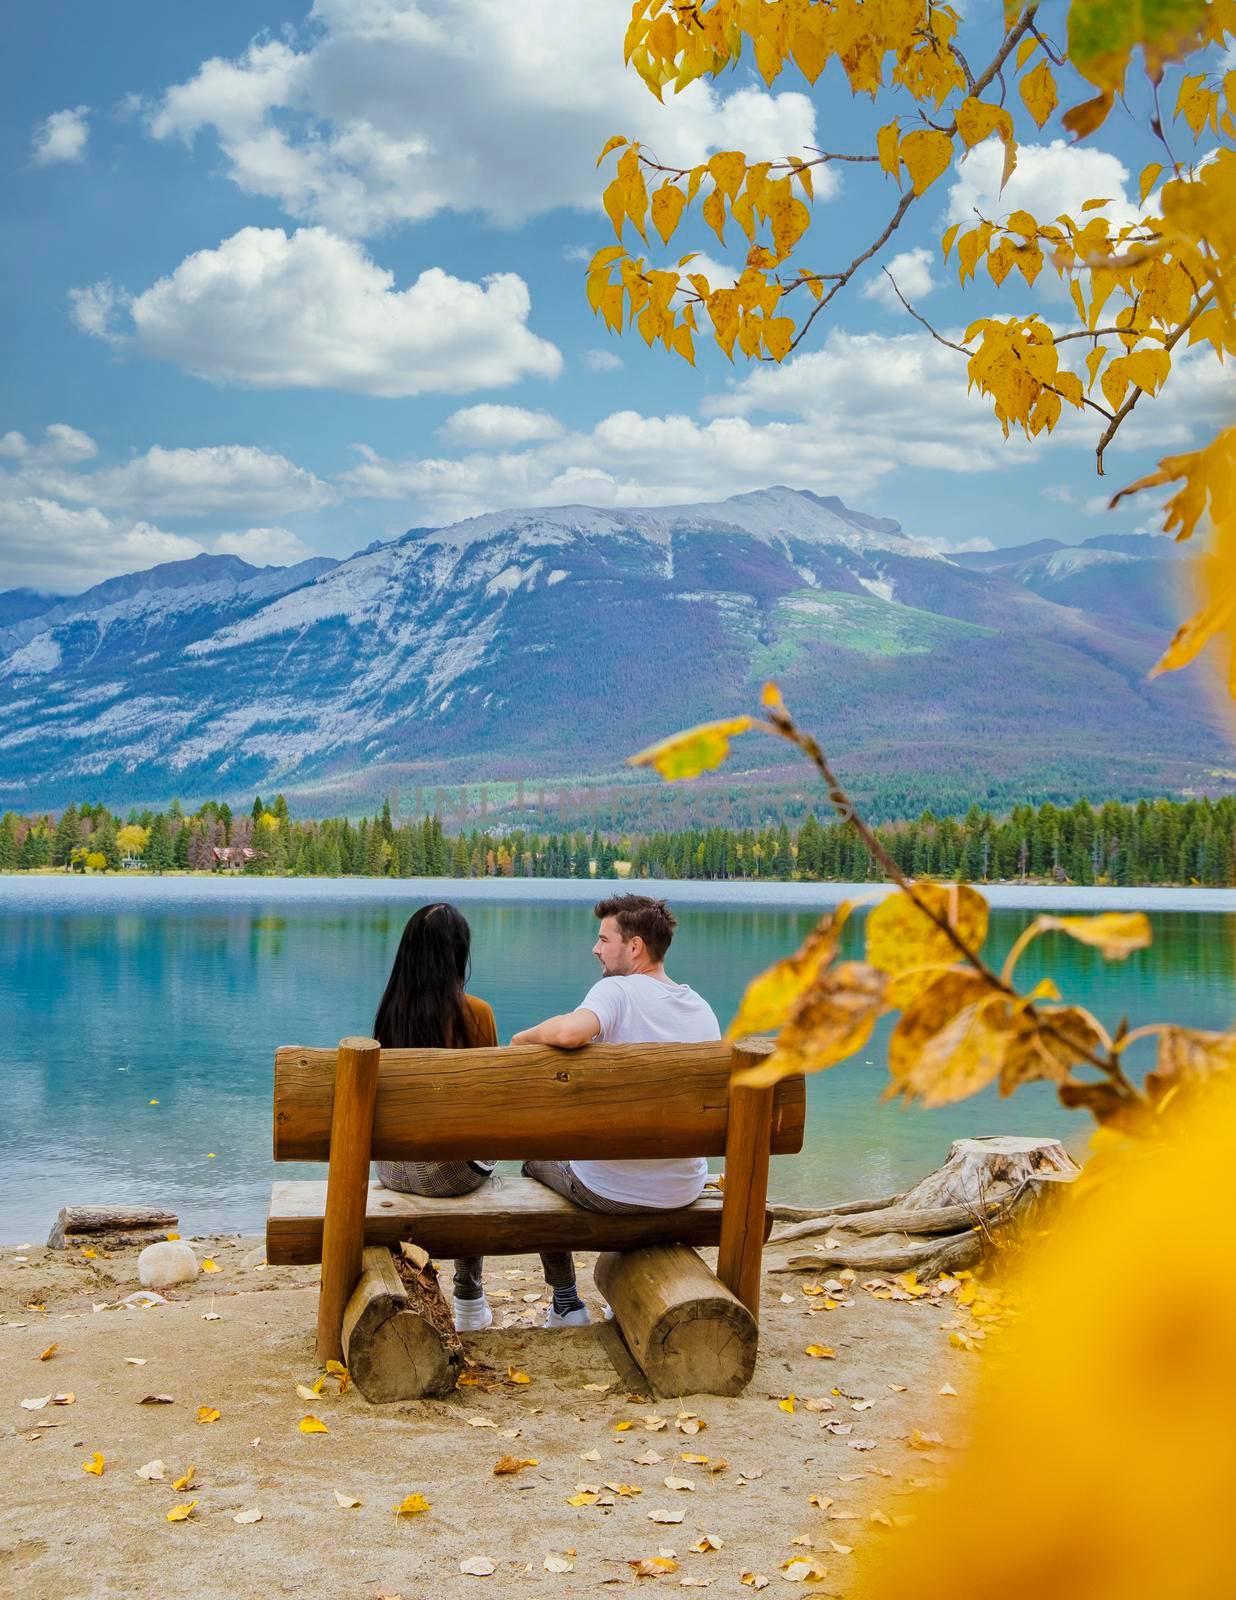 Beauvert lake at Jasper with autumn trees, Canada, a Canadian lake popular for the canoe in Canada. couple men and women sitting on a bench looking out over the lake with colorful autumn trees